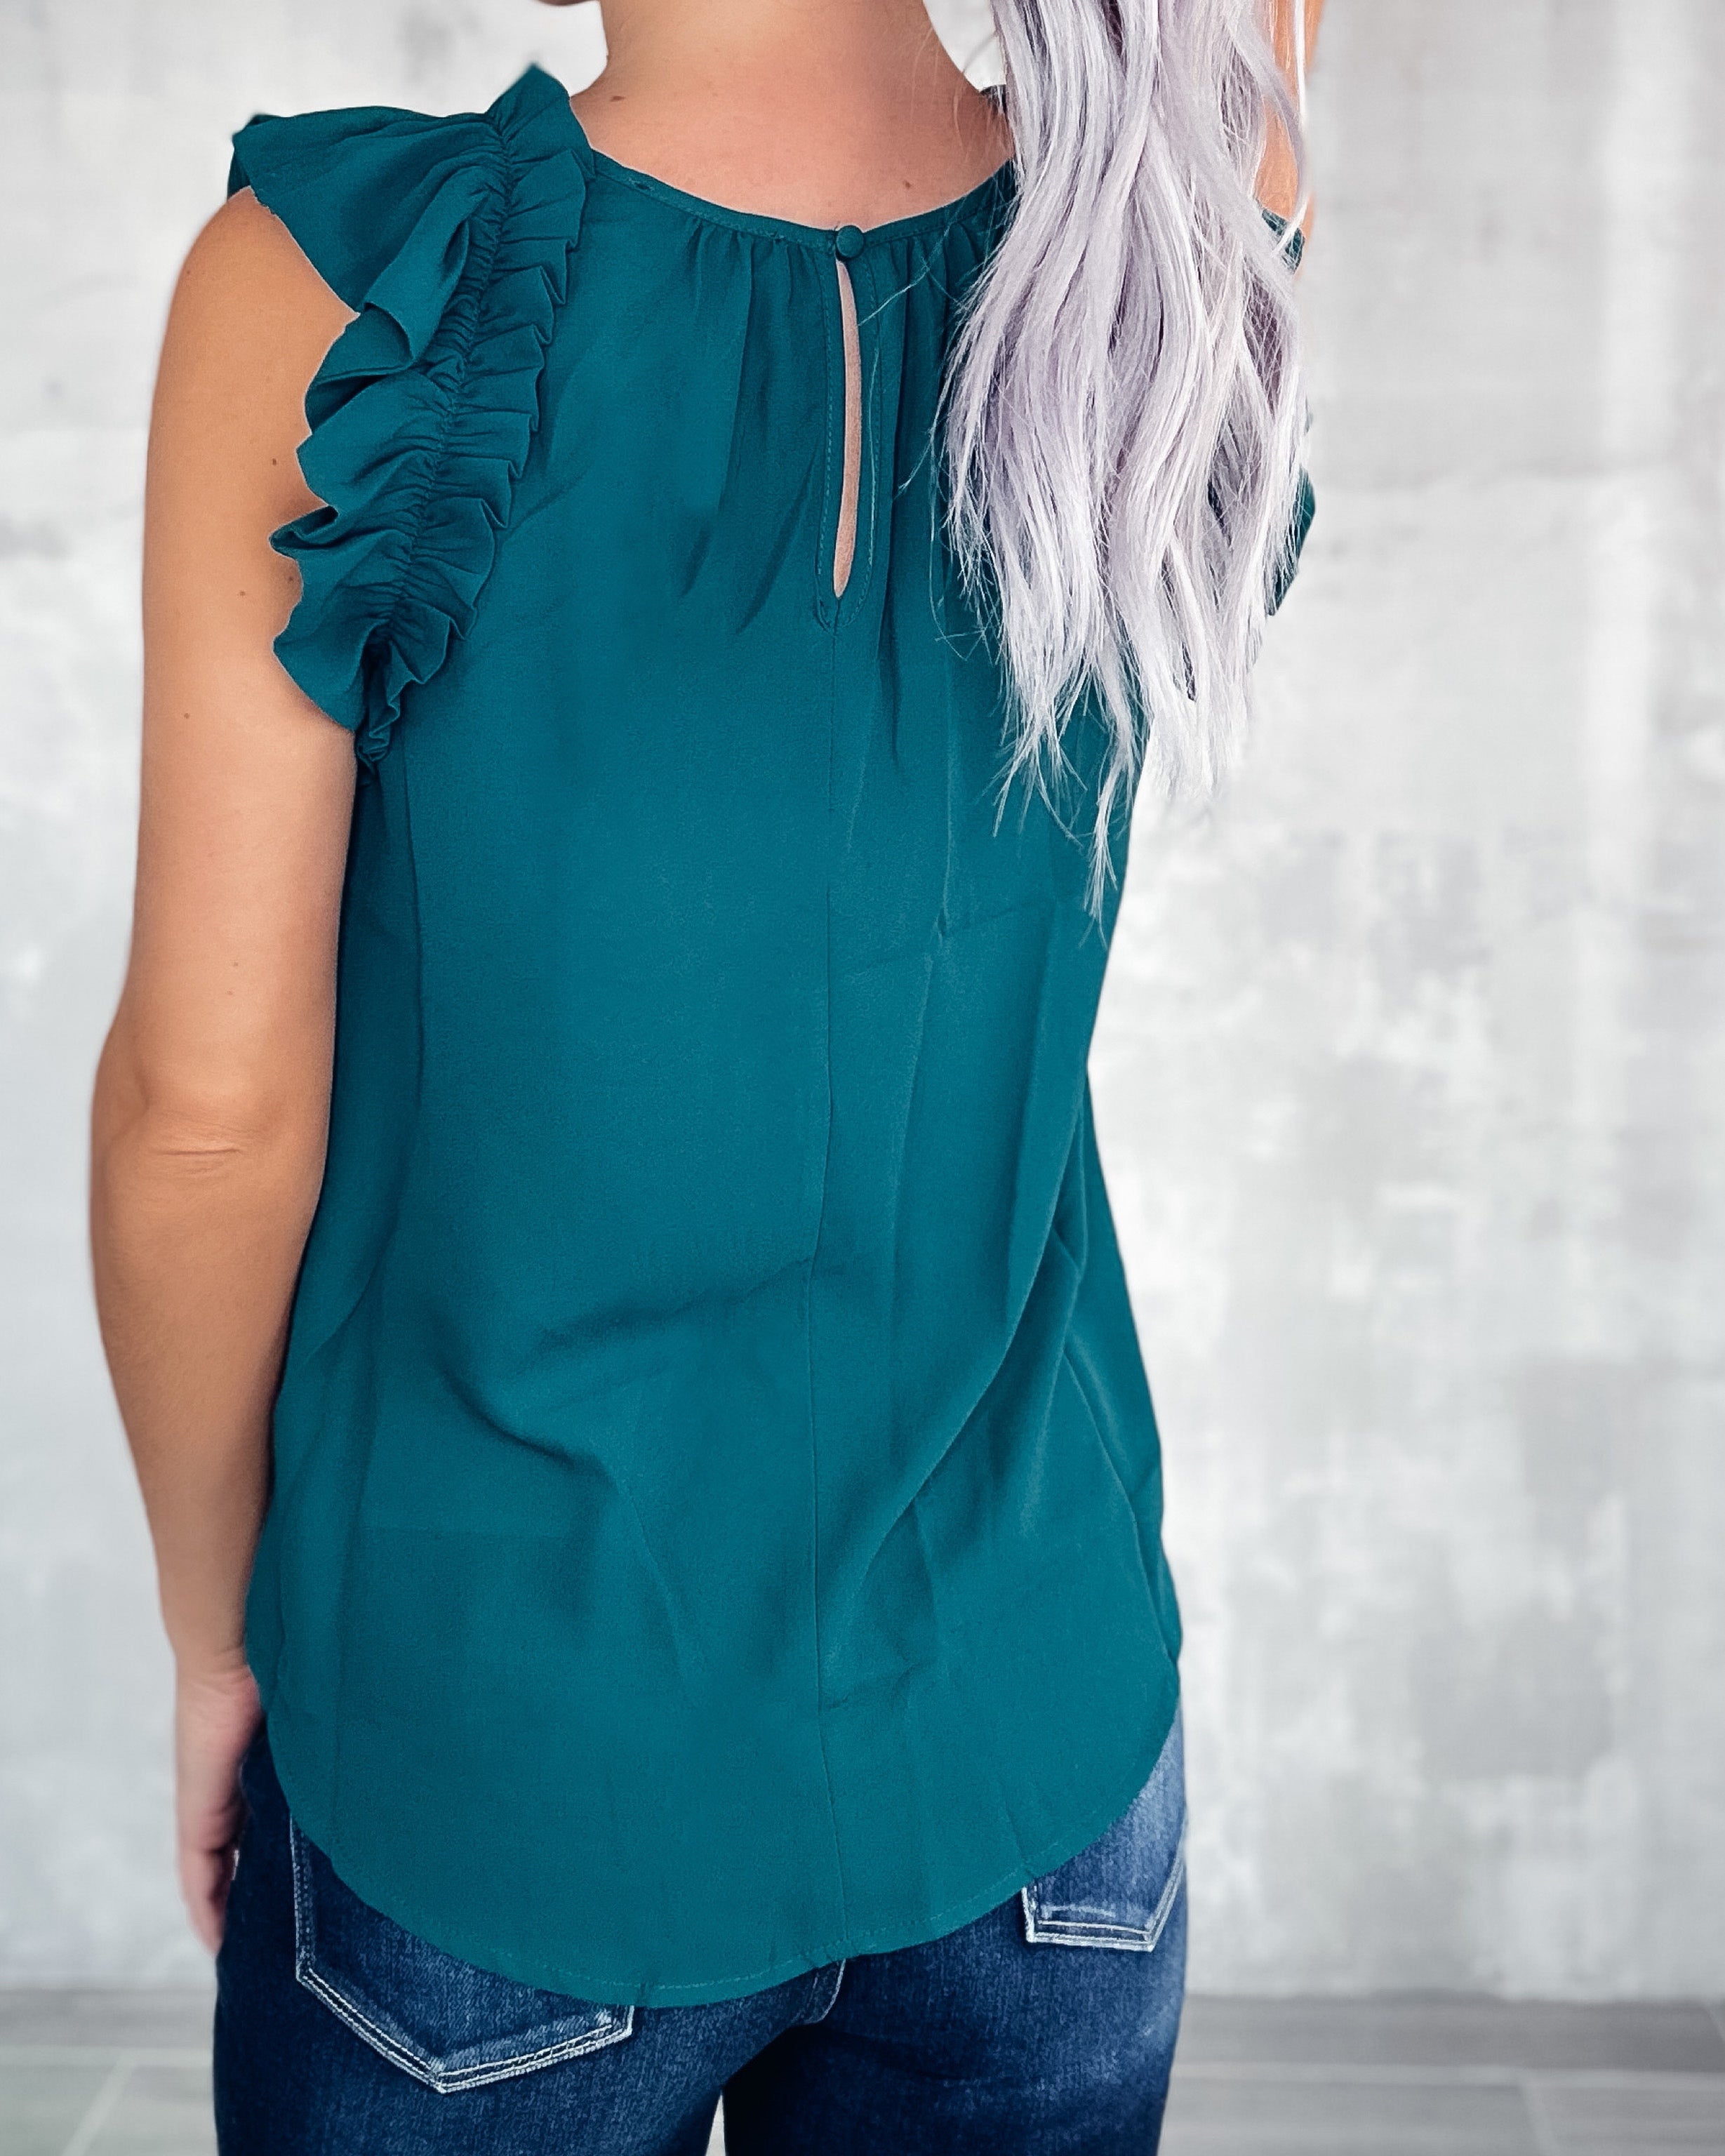 Effortless Chic Ruffle Top - Teal